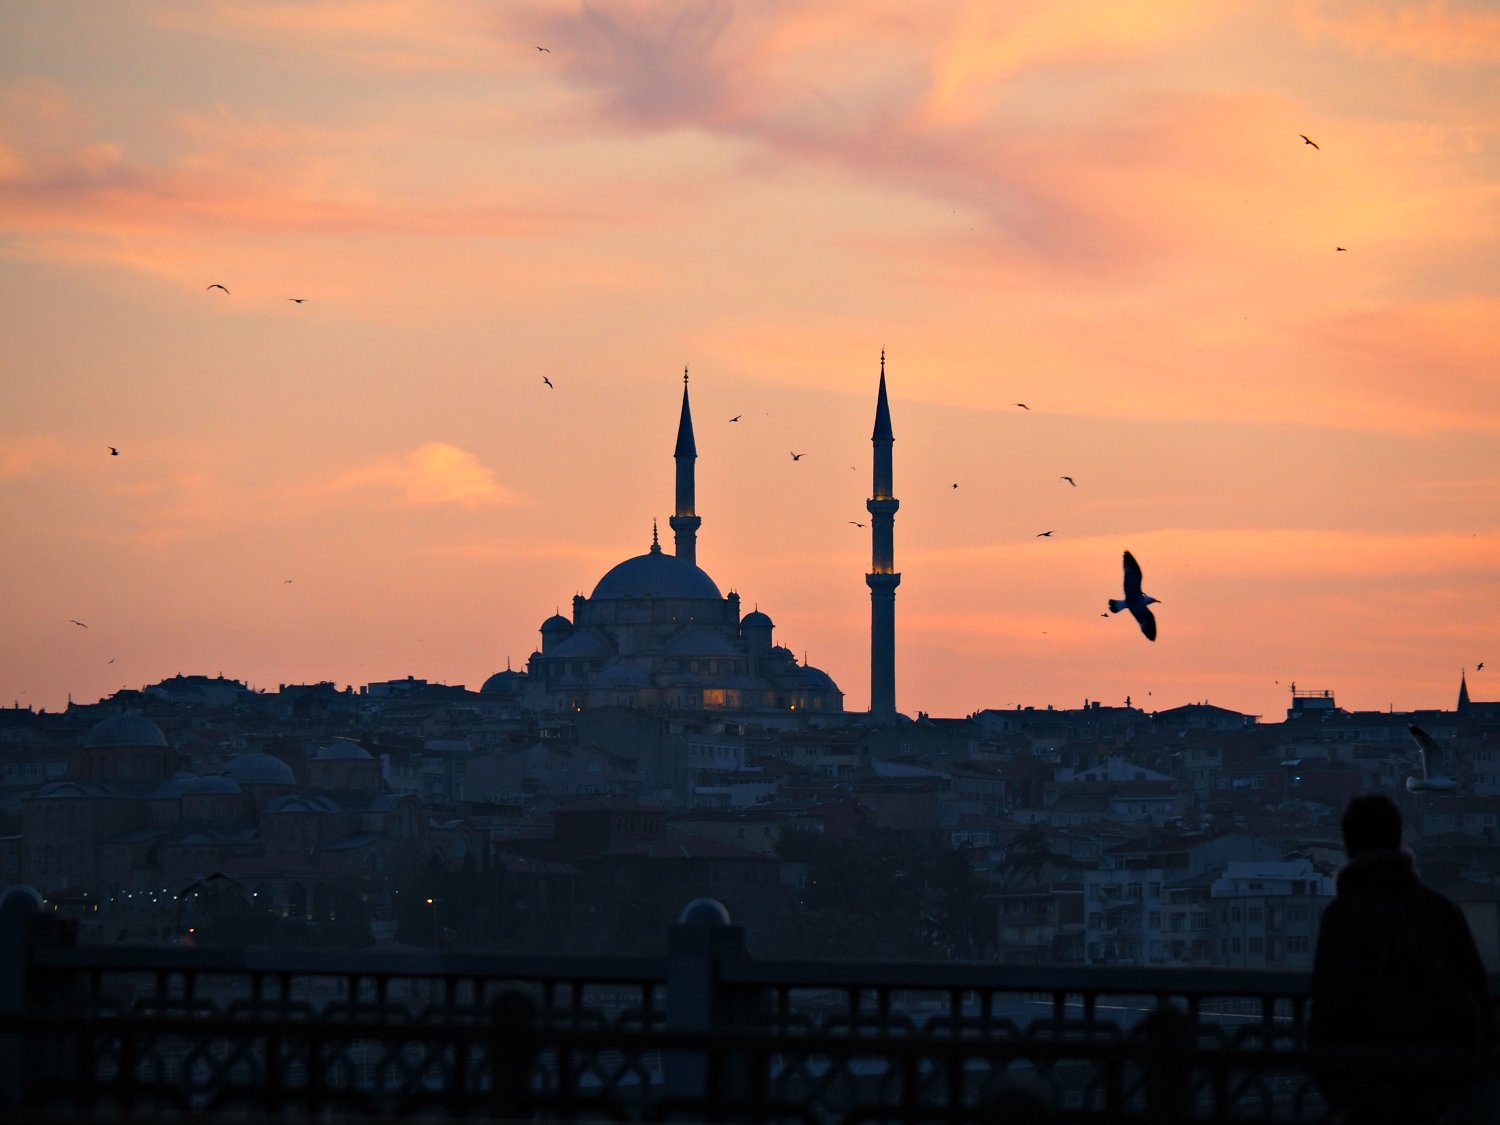 Istanbul Luxury Travel Guide - Hotels - Restaurants - Events